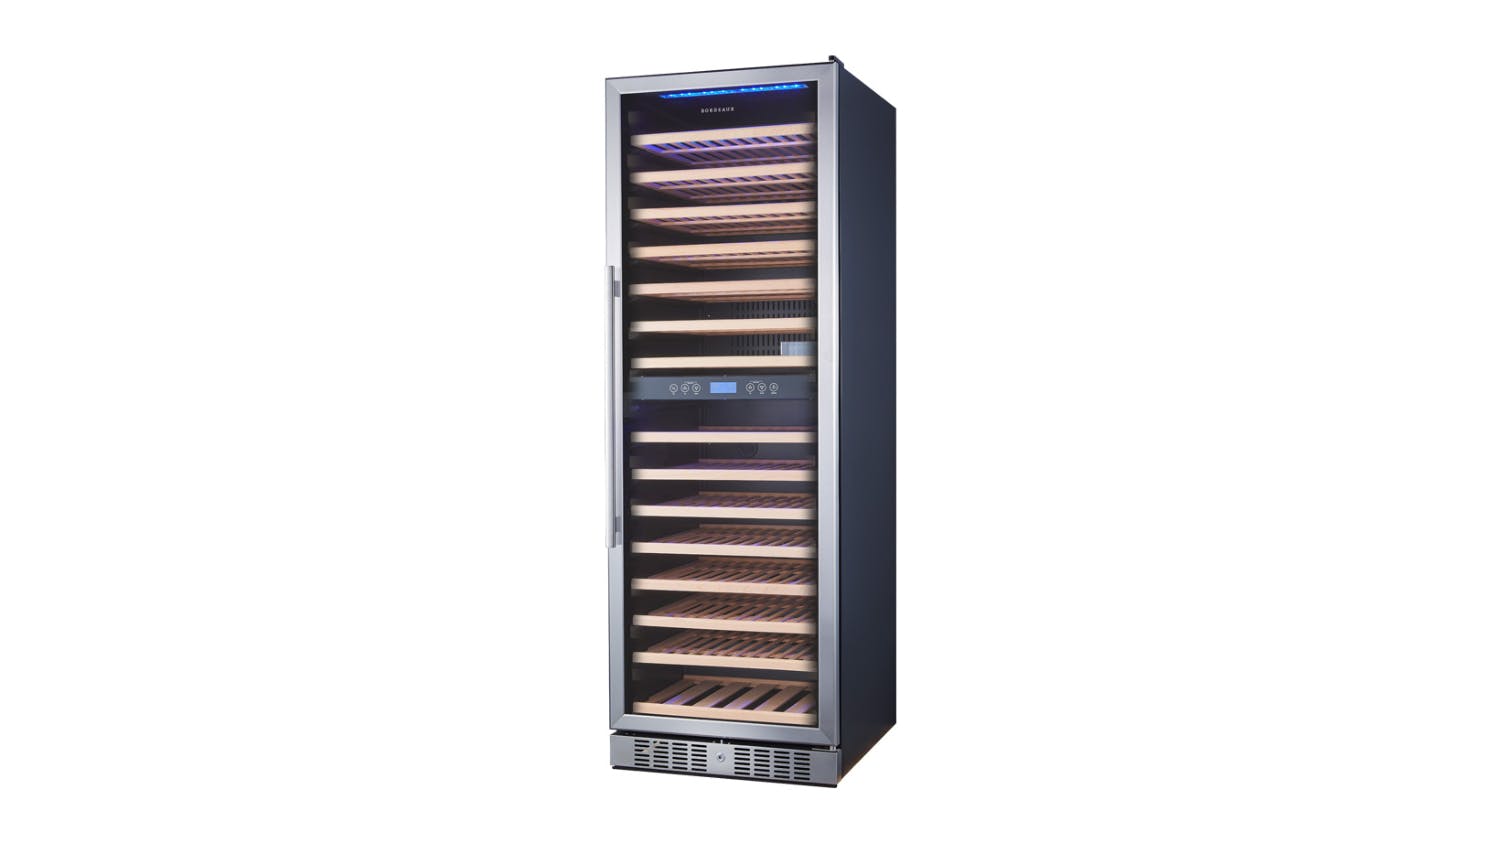 Bordeaux 160 Bottle Dual Zone Right Hand Wine Cooler - Stainless Steel